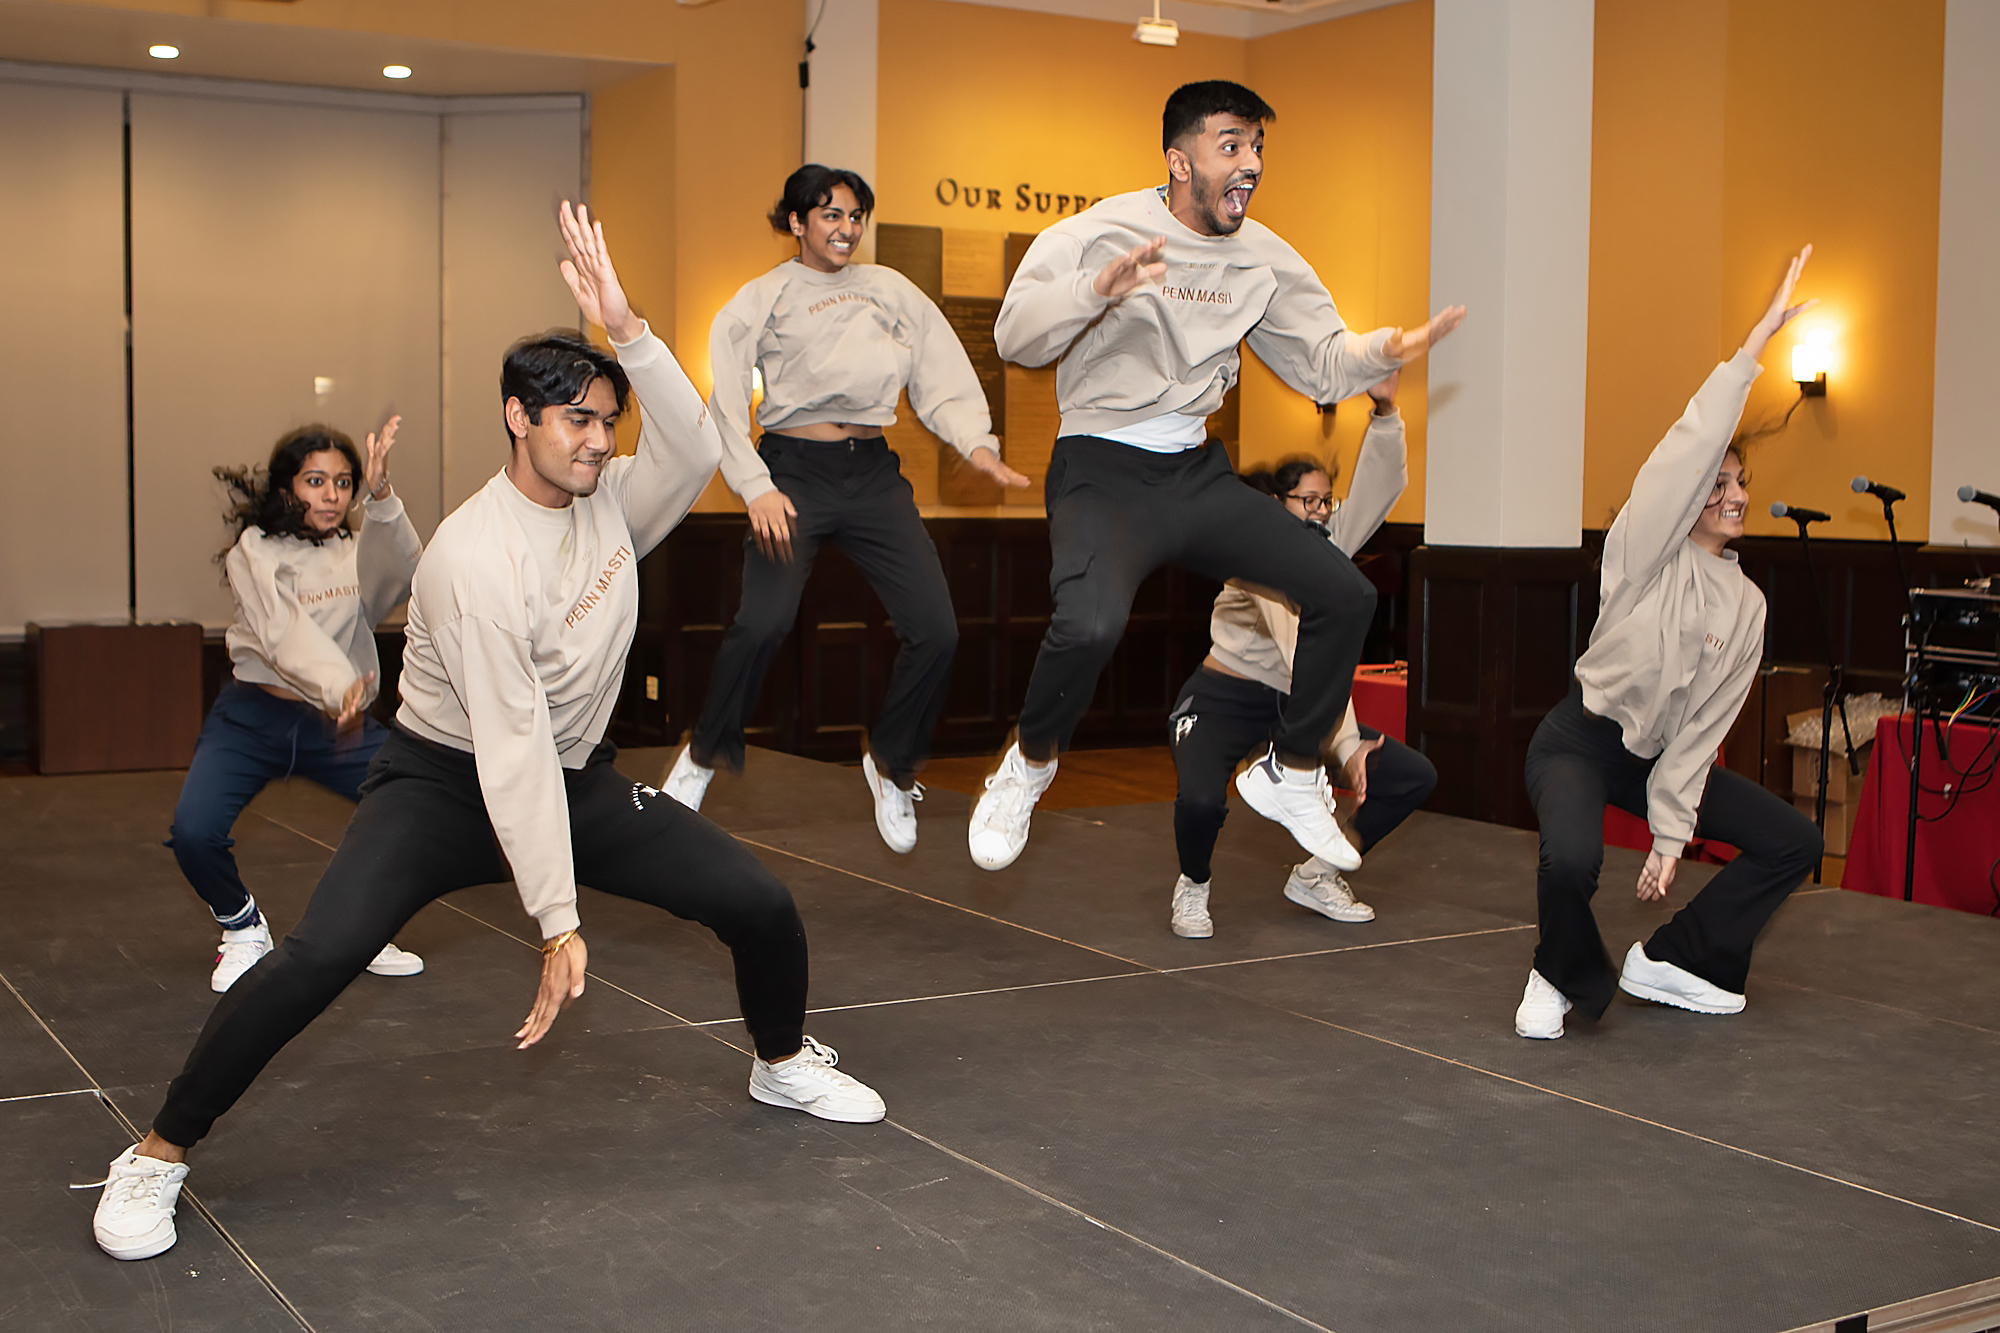 Six dancers in uniform beige and black sweatsuits squat and jump on stage